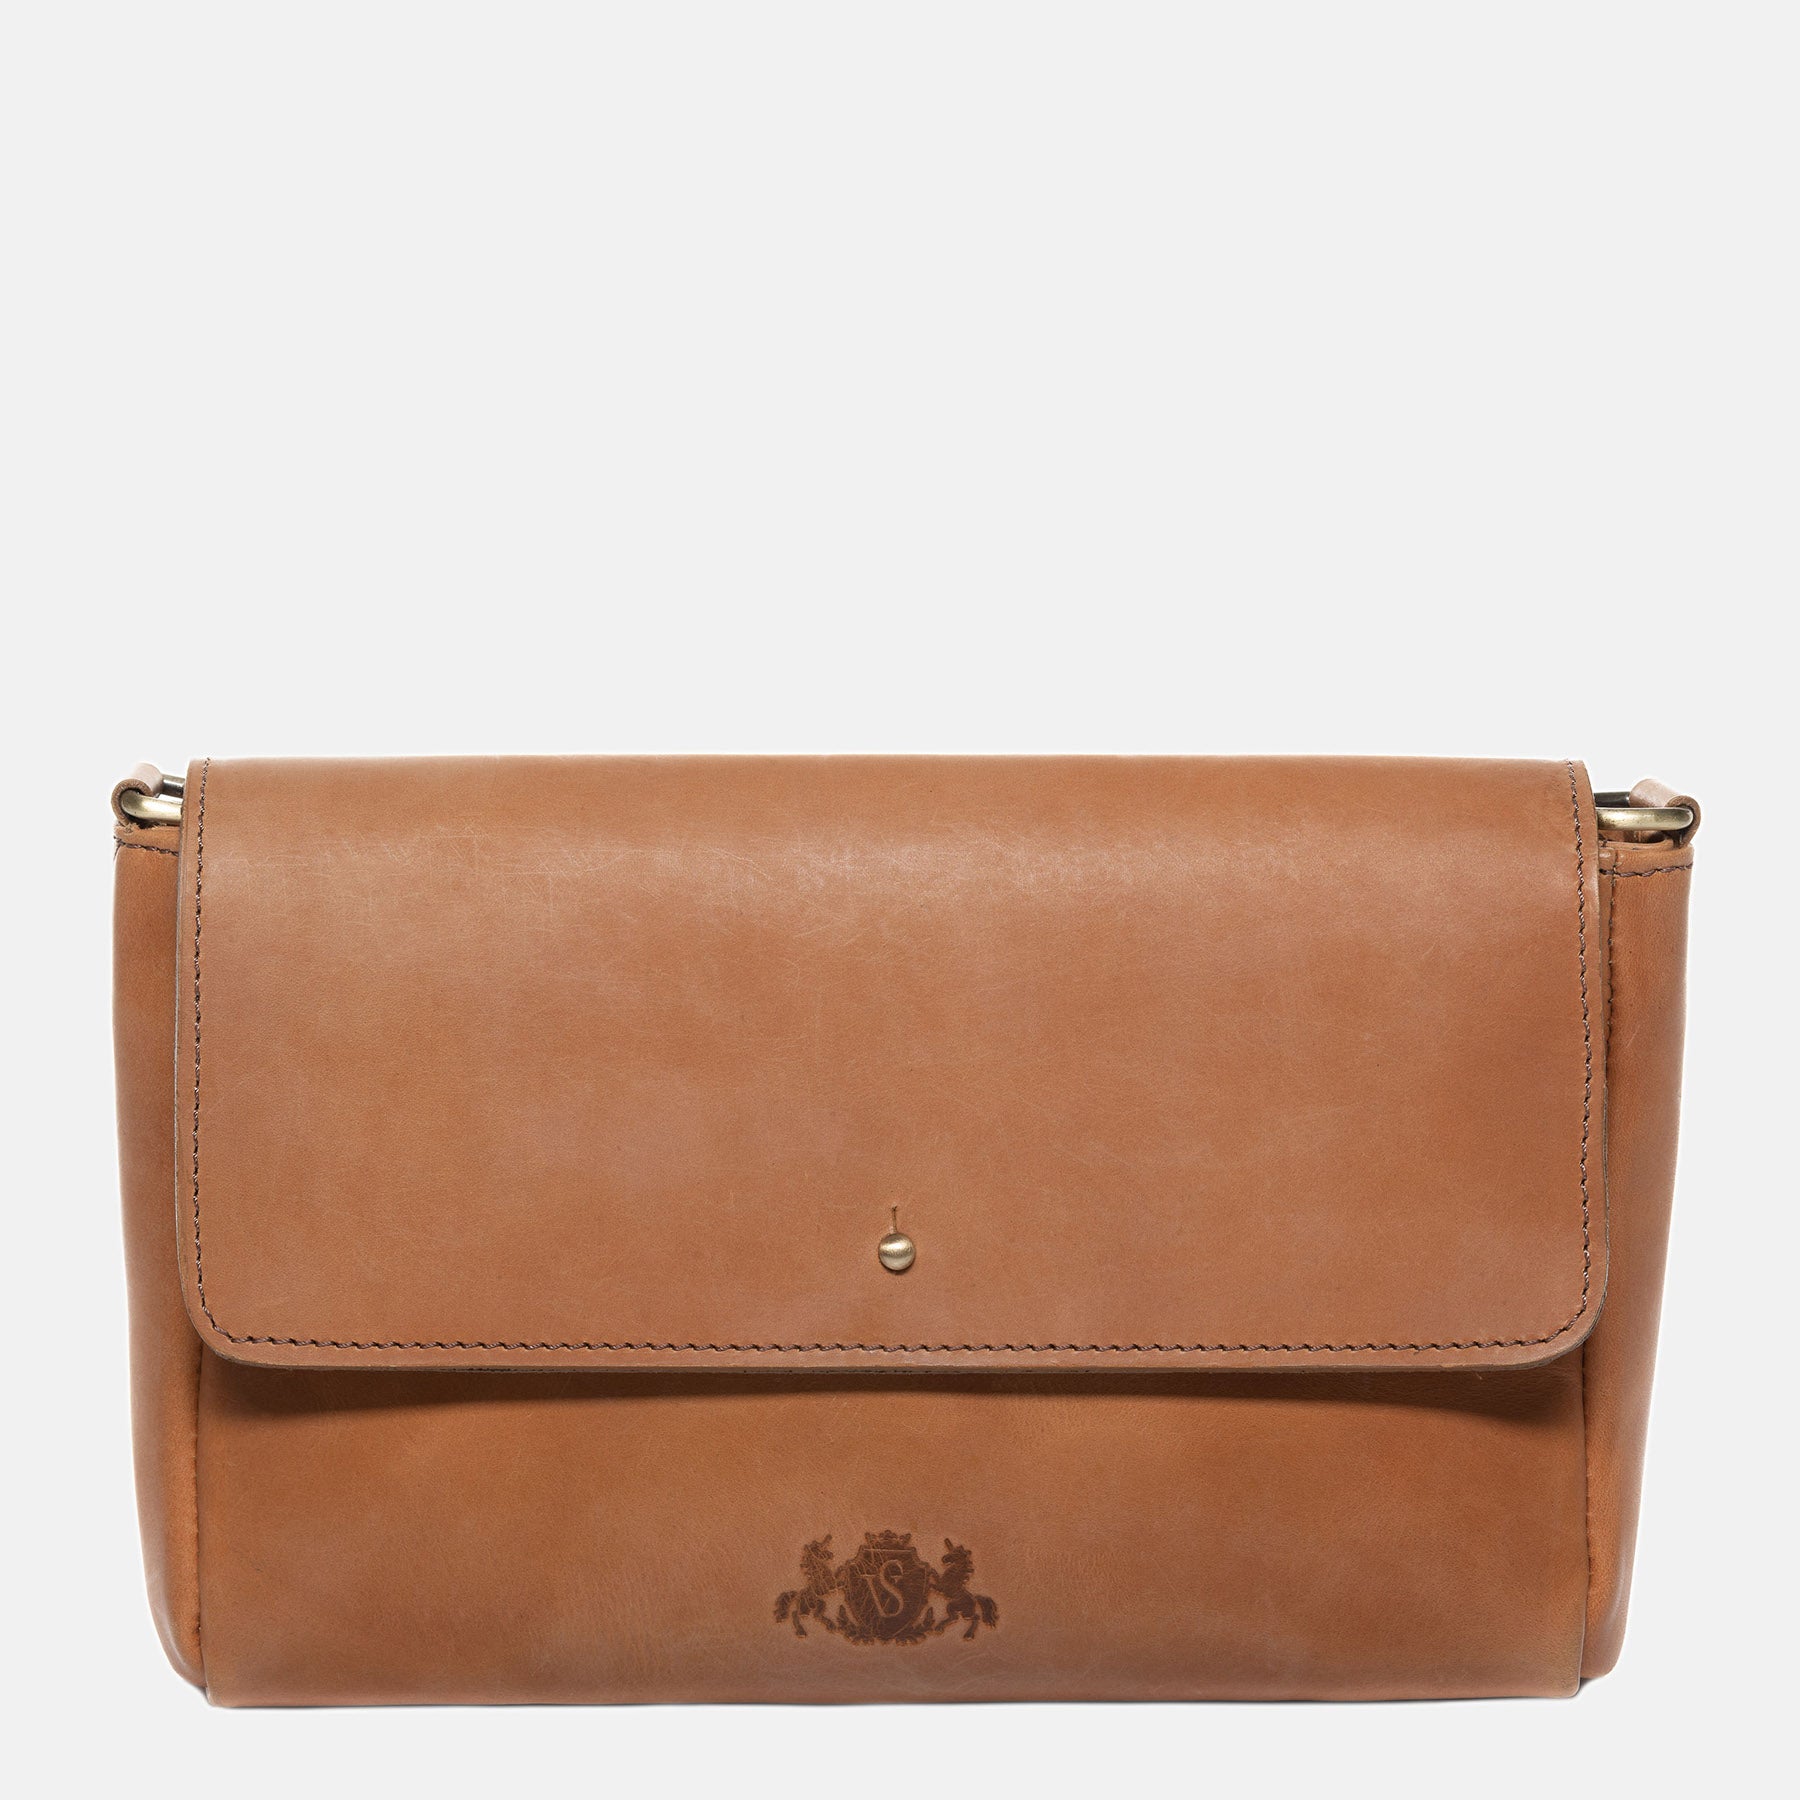 Clutch ELSA smooth leather brown